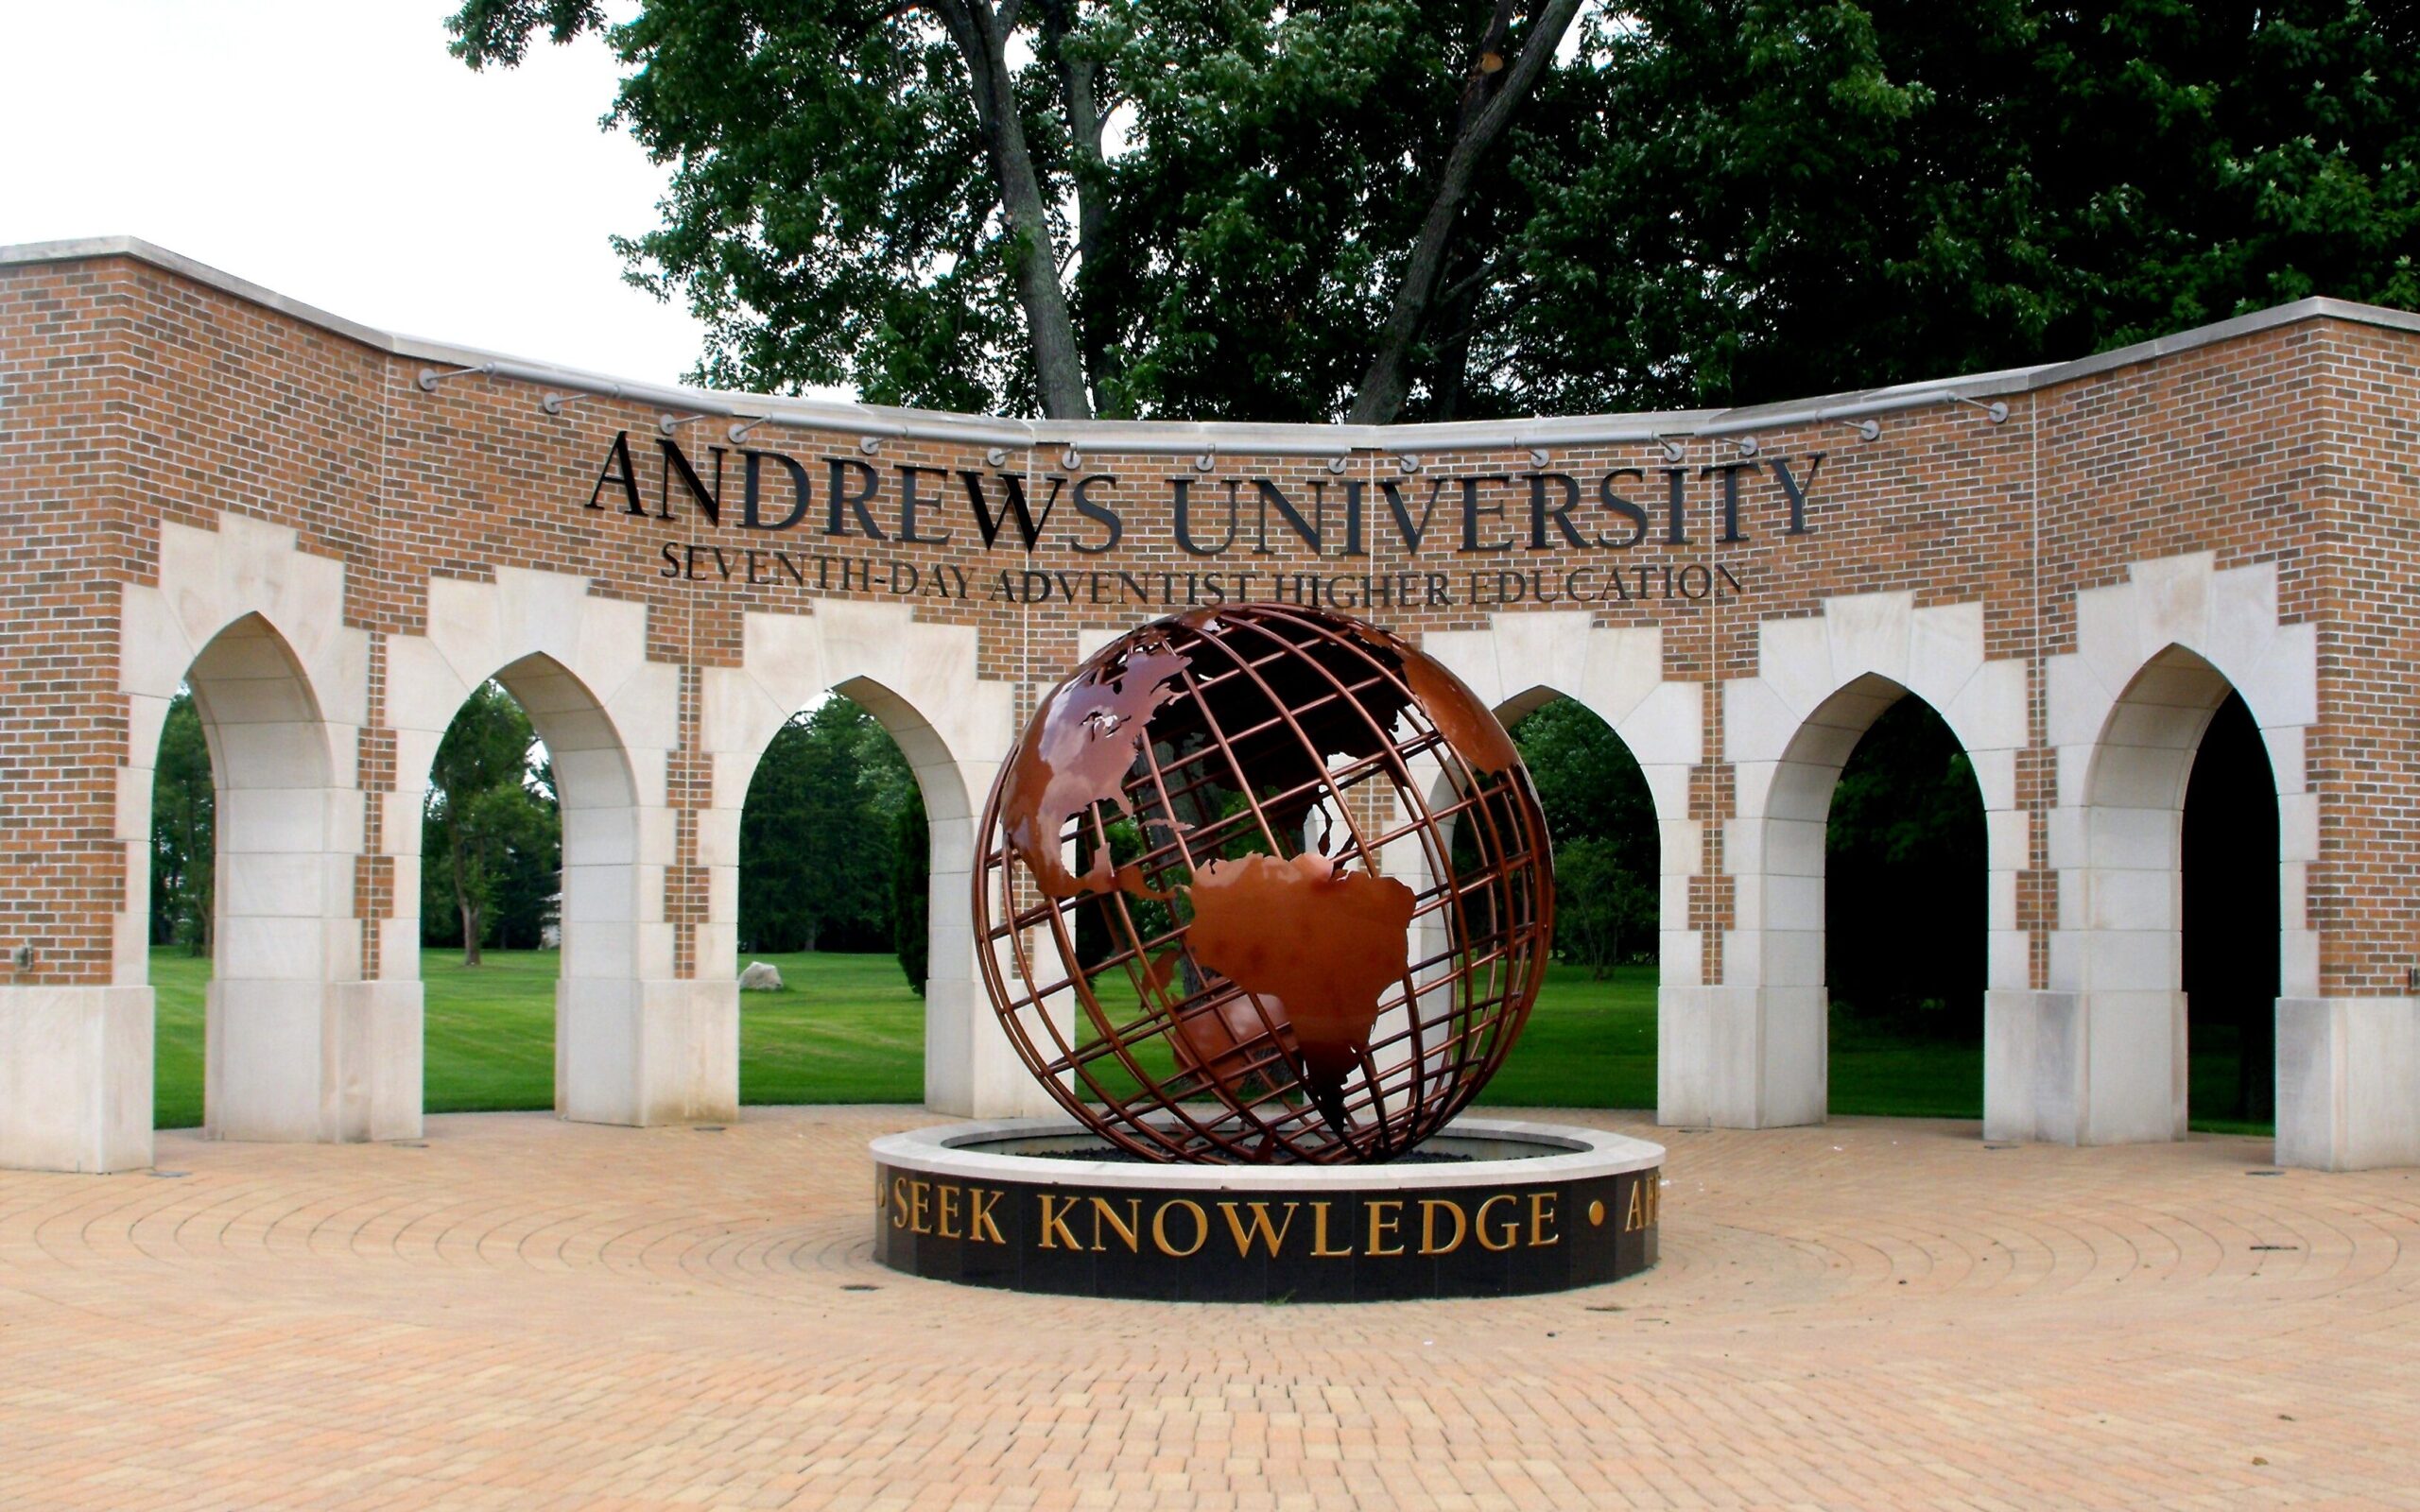 A photo of the Andrews University campus